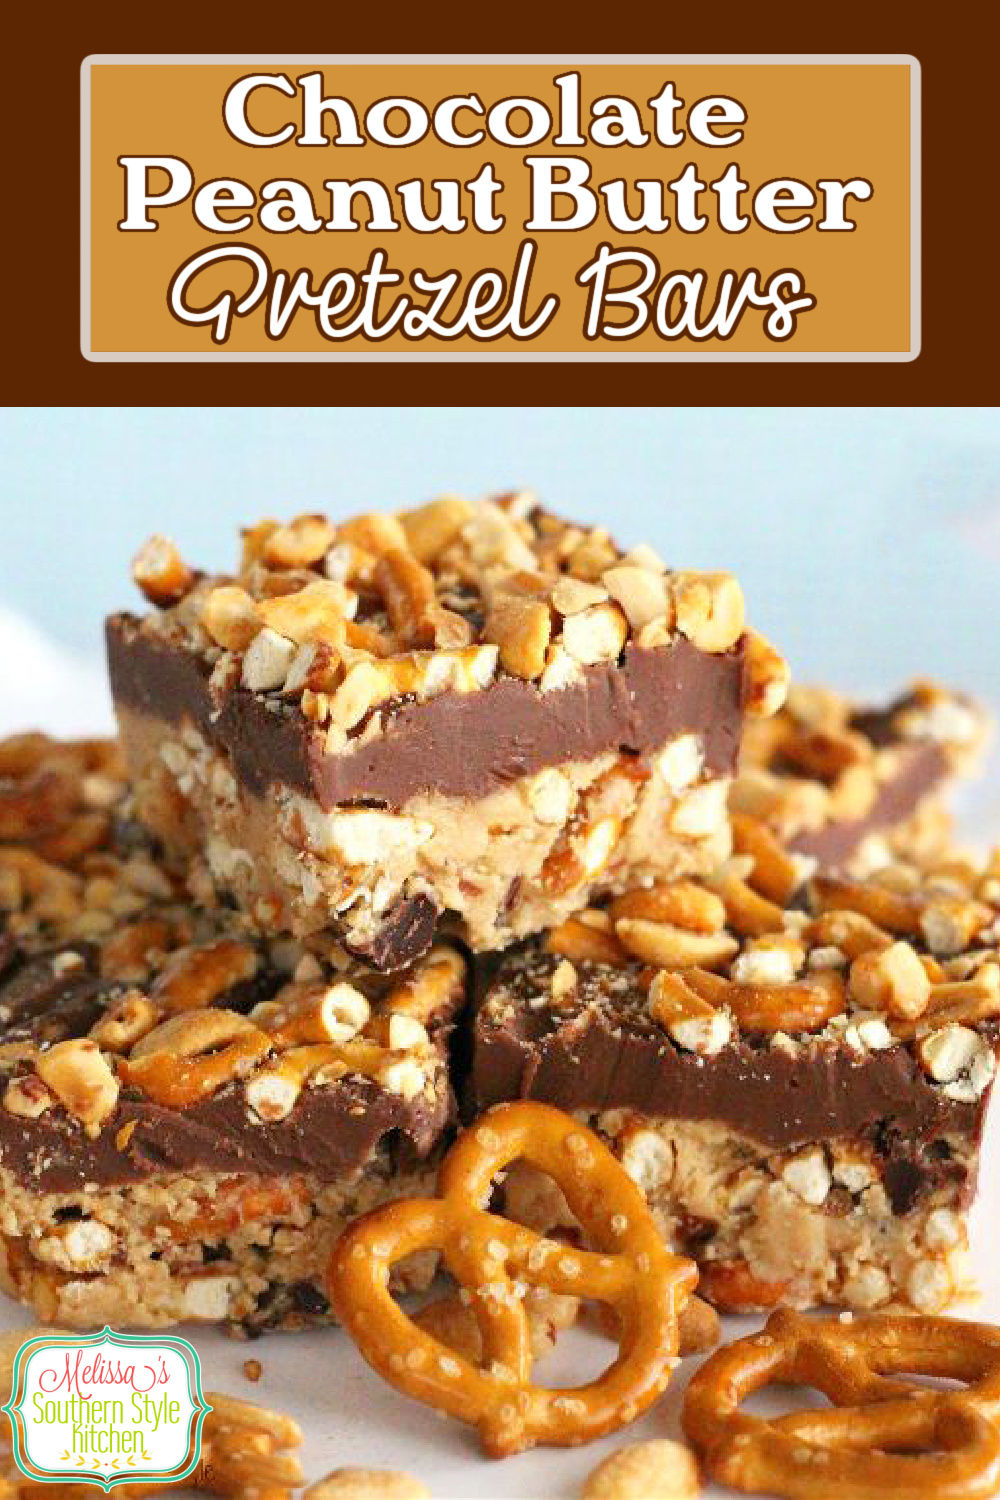 You'll love these no bake sweet and salty Chocolate Peanut Butter Pretzel Bars #chocolatebars #peanutbutterbars #pretzels #desserts #dessertfoodrecipes #southernfood #southernrecipes #pretzelbars